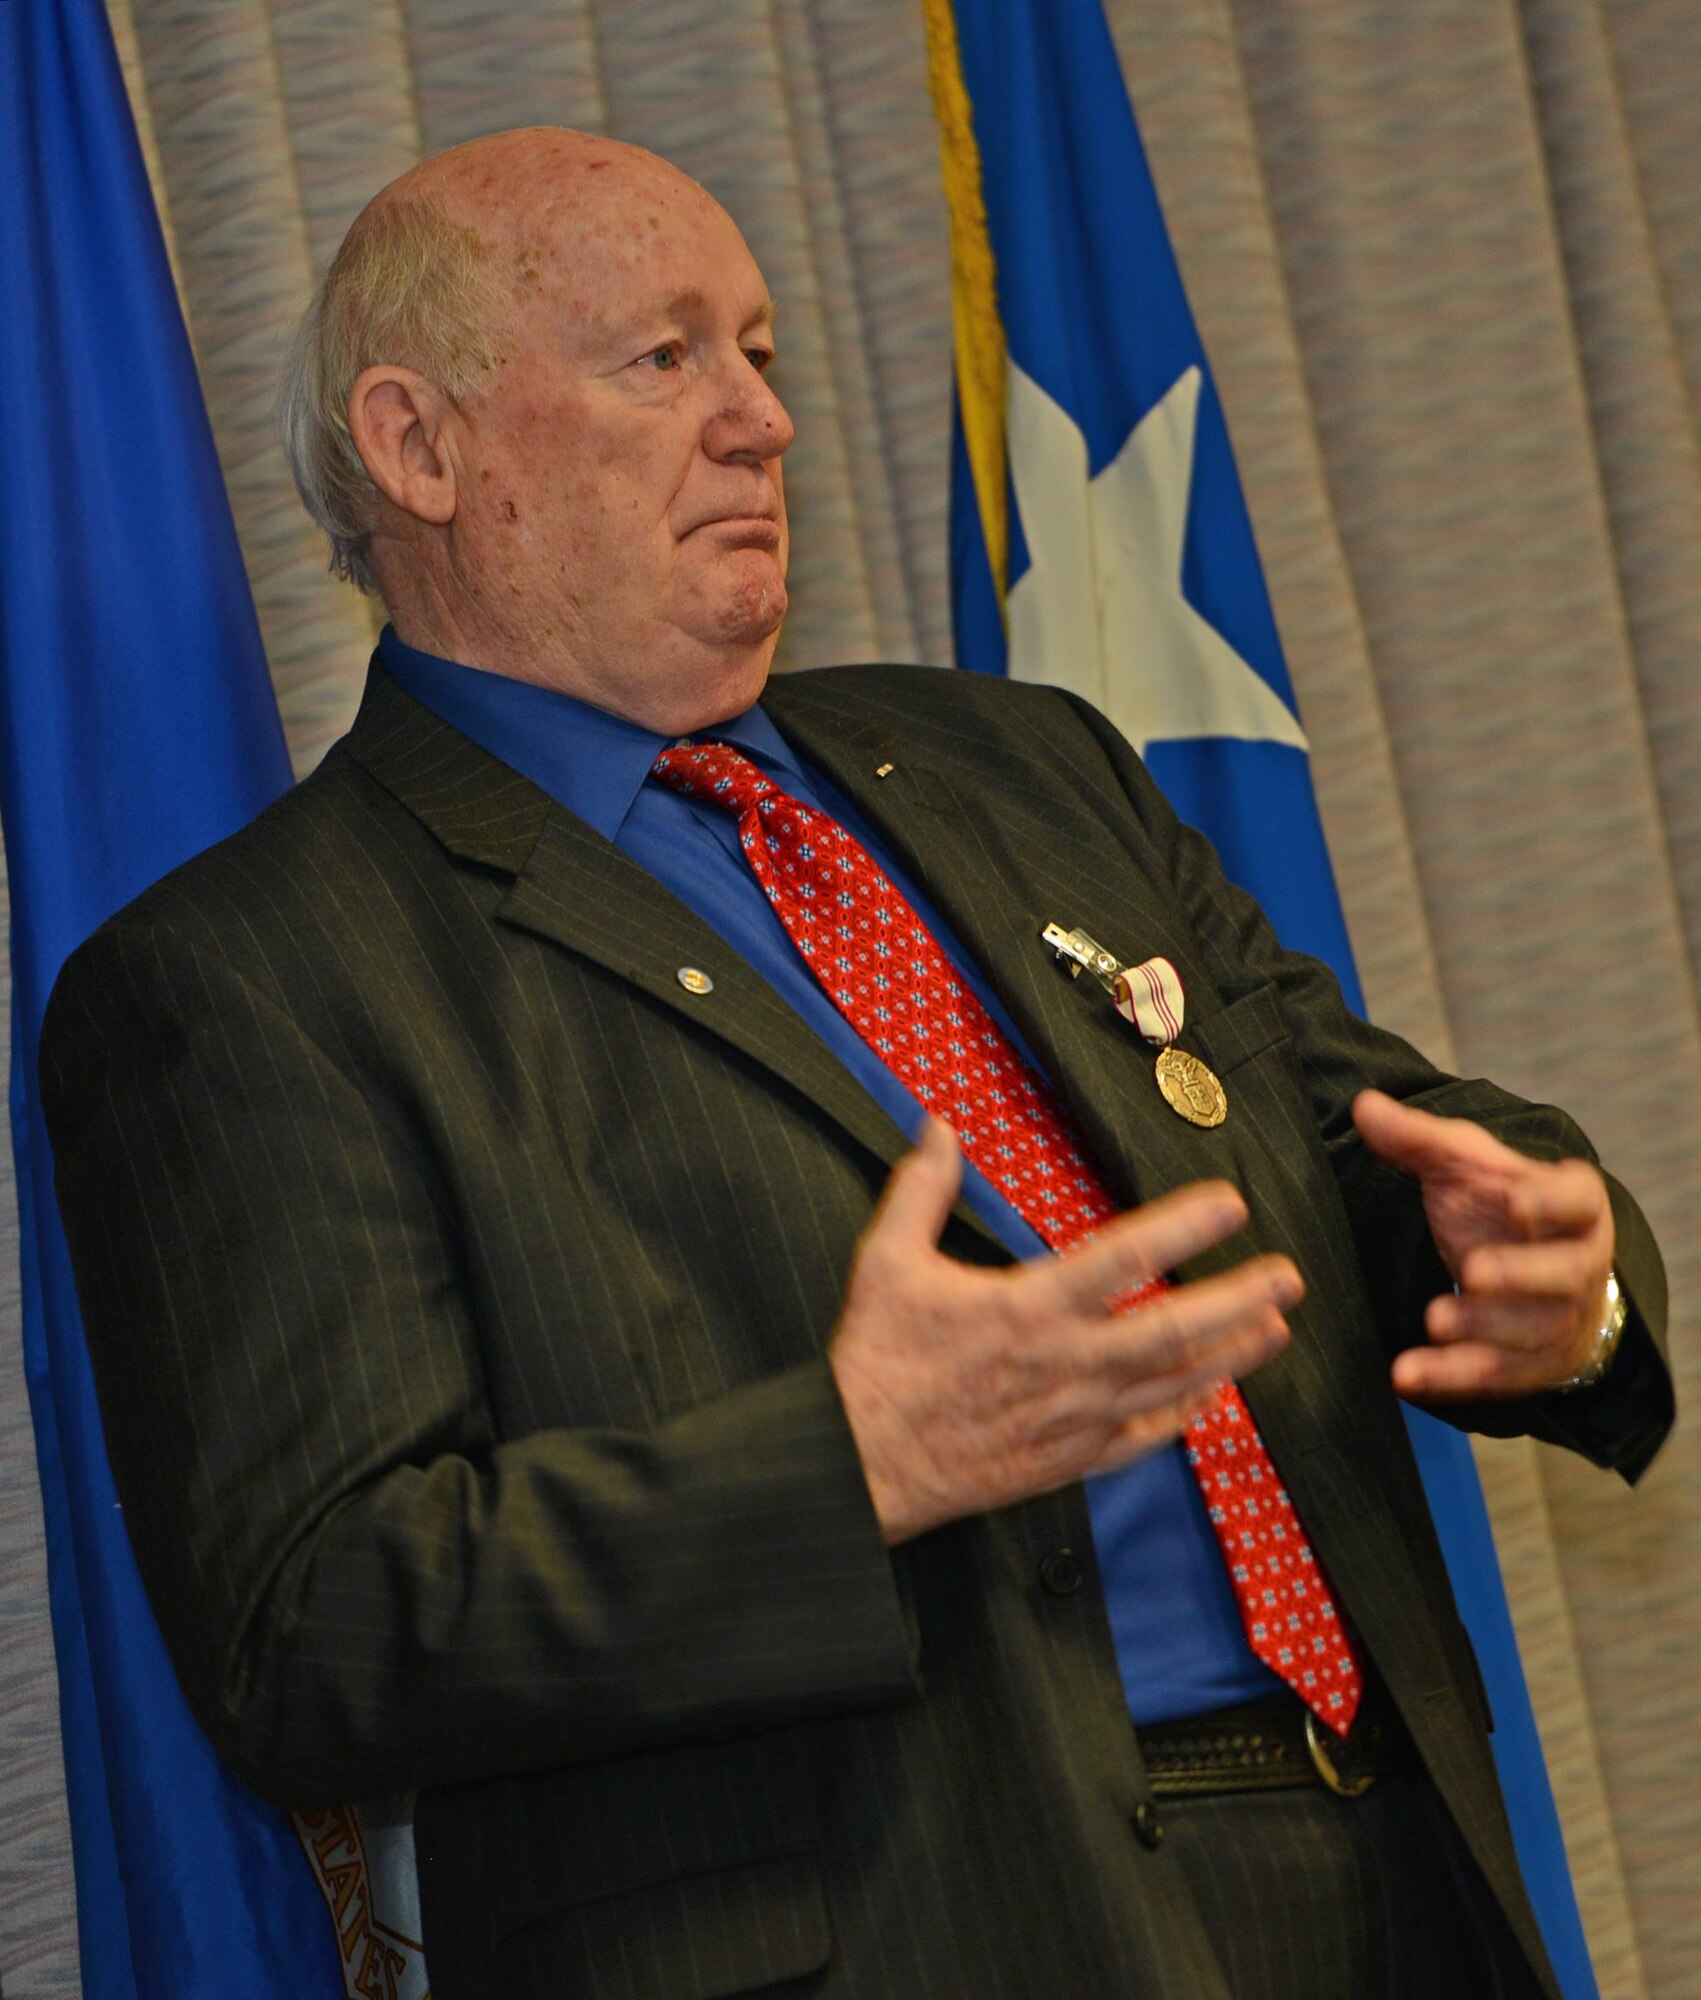 Herb Mason, Air Force Special Operations Command historian, speaks at his retirement ceremony on Hurlburt Field, Fla., Jan. 7, 2016. Mason served from April 28, 1965 to Jan. 3, 2016, making him the longest serving historian in Air Force history. (U.S. Air Force photo/Staff Sgt. Melanie Holochwost)